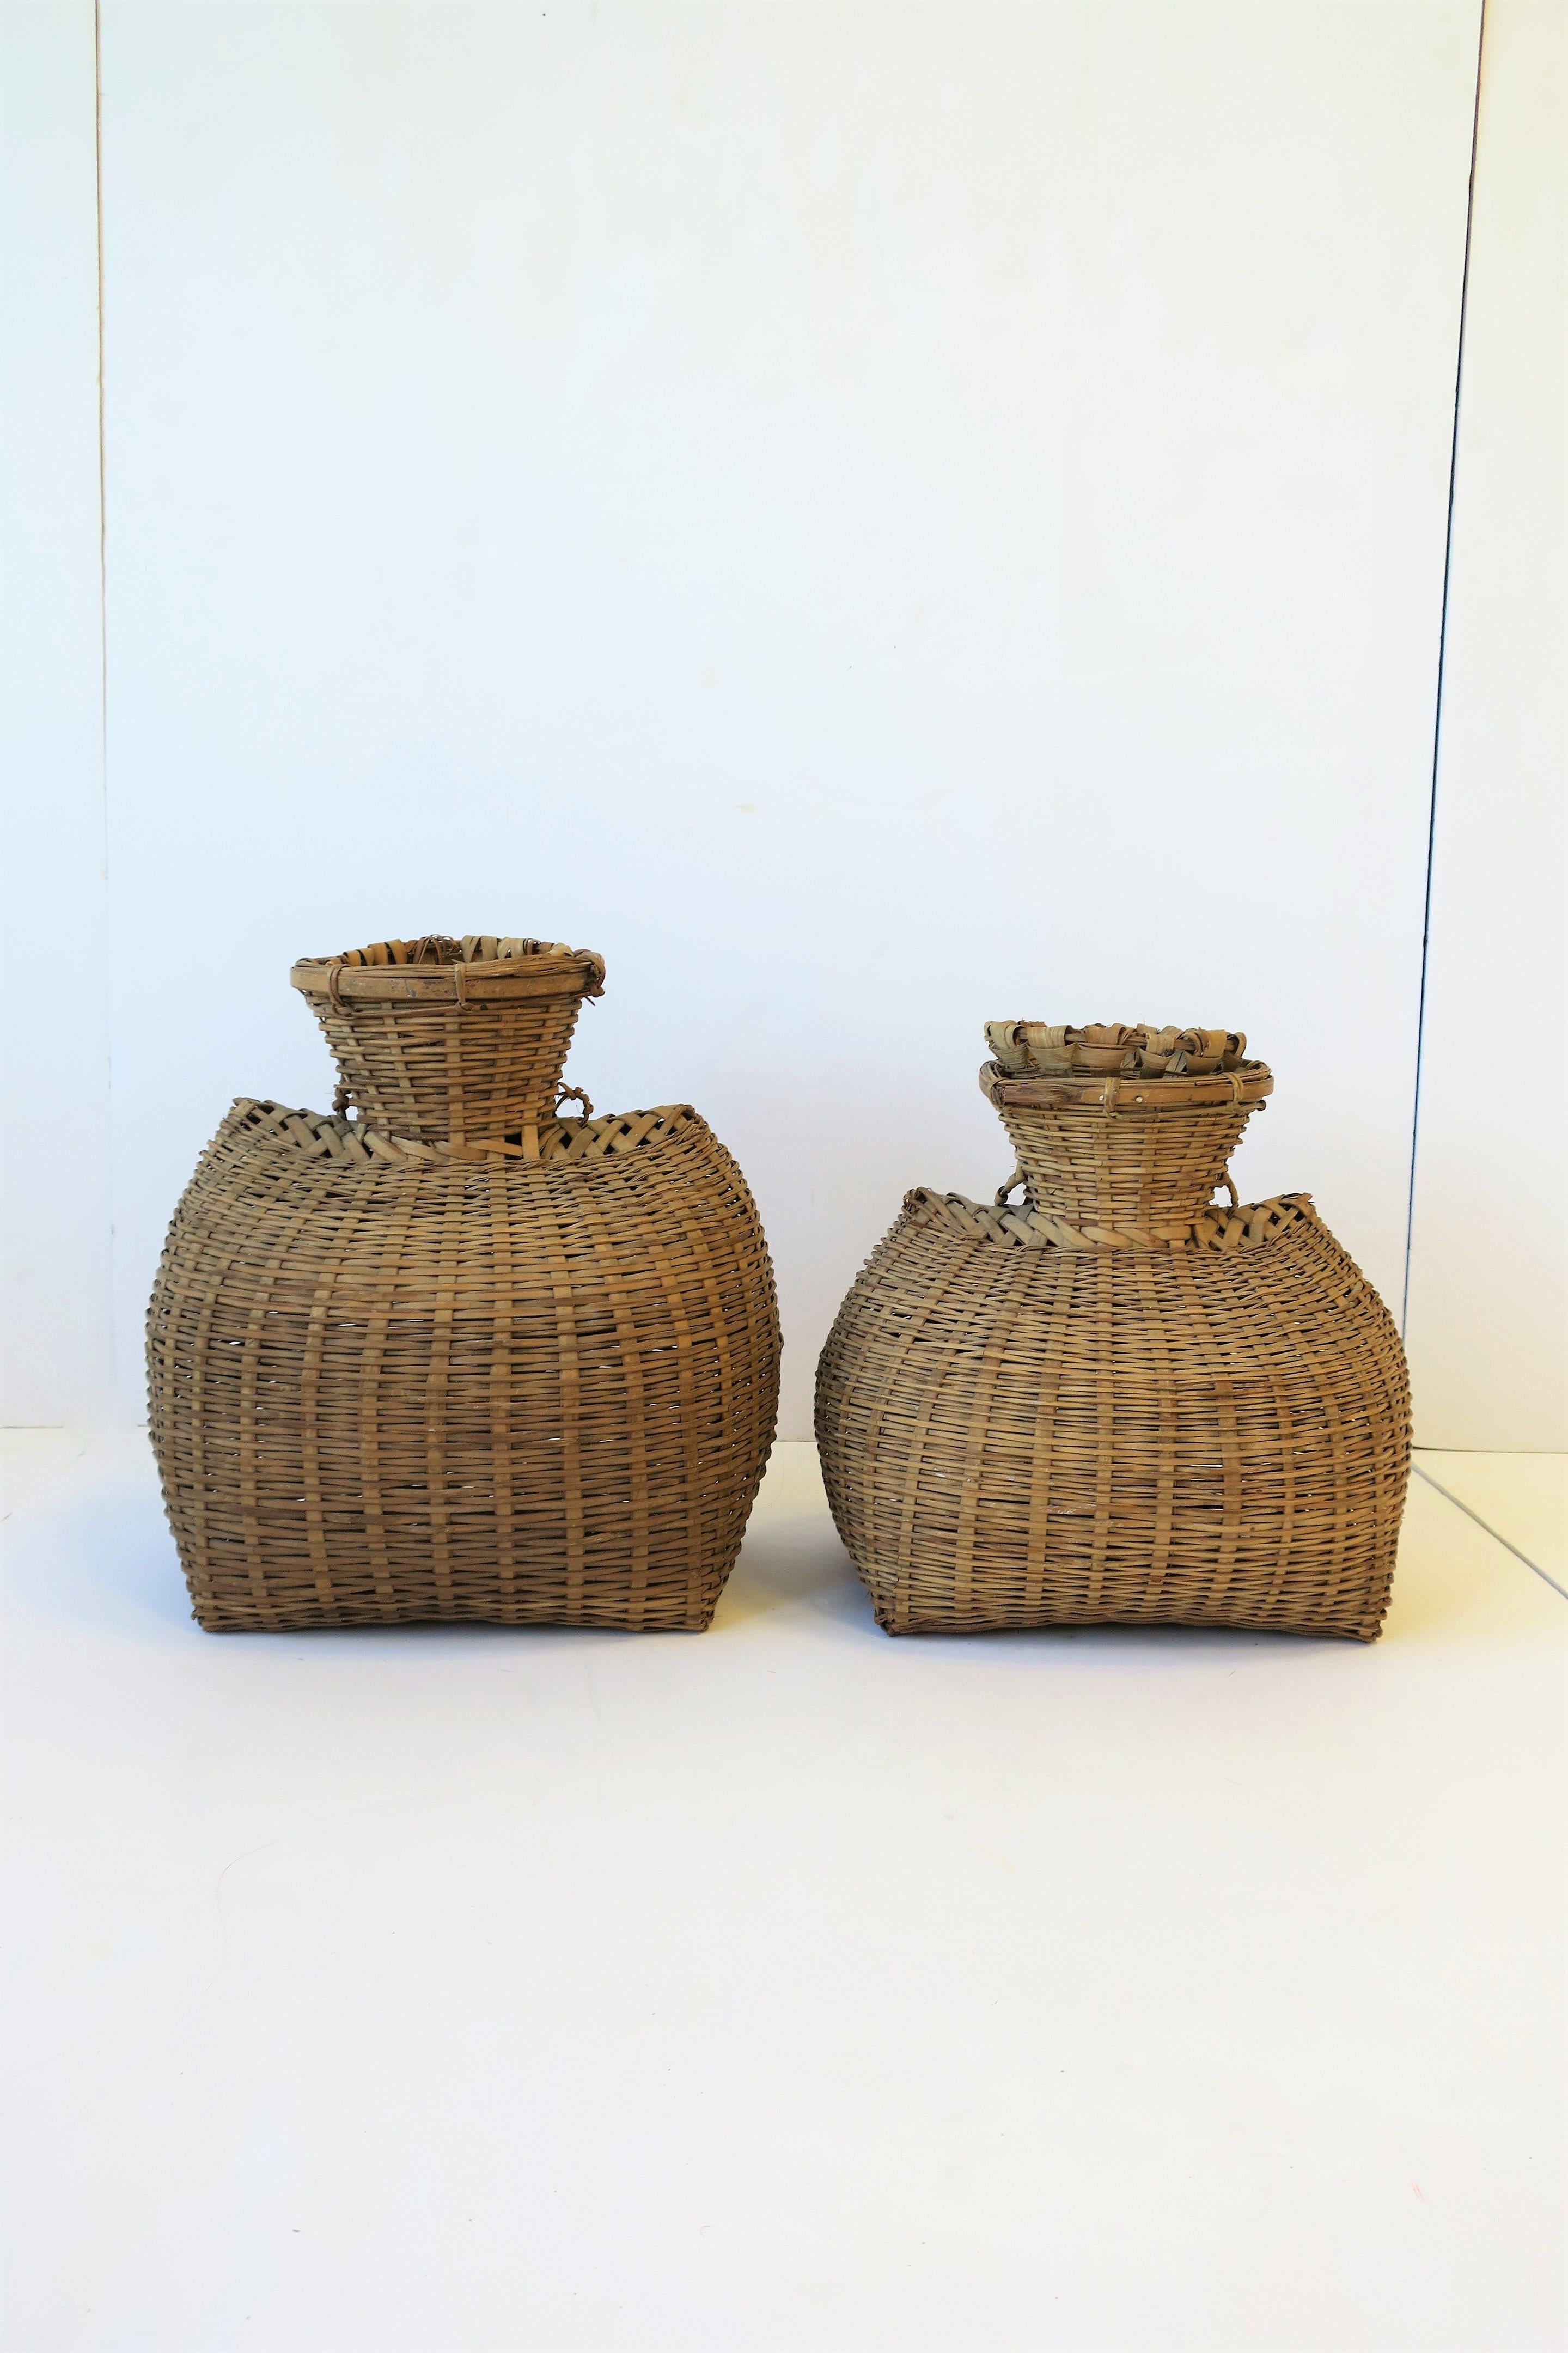 A beautiful set of Asian handwoven wicker baskets. Baskets are listed and sold as a set. 

Baskets measure: 
7.50